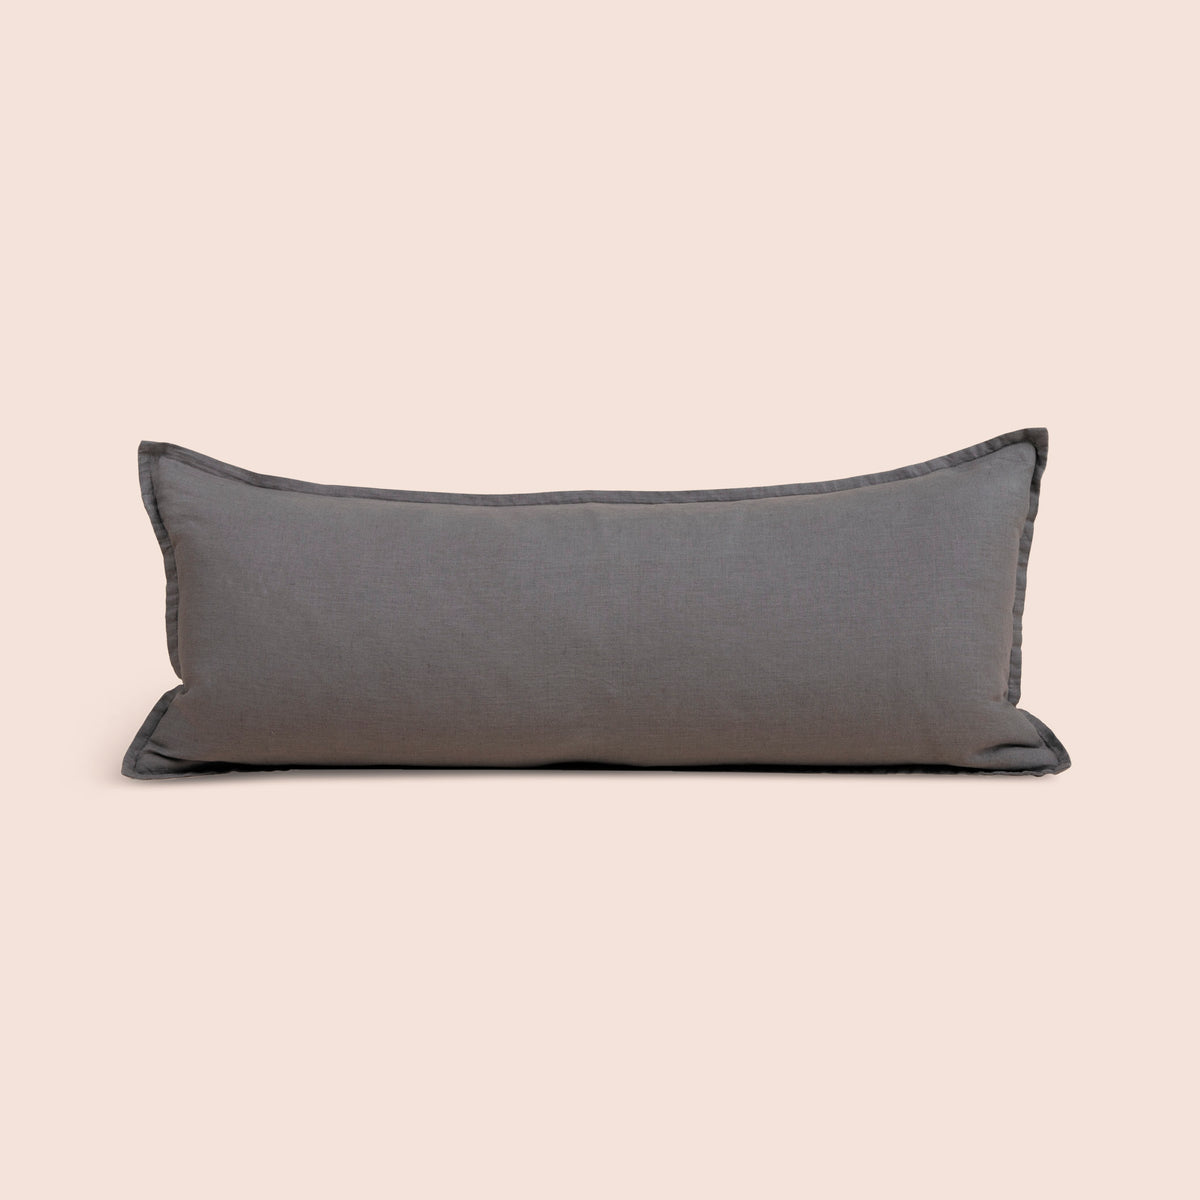 Image of Stone Gray Blended Linen Lumbar Pillow Cover on a lumbar pillow with a light pink background